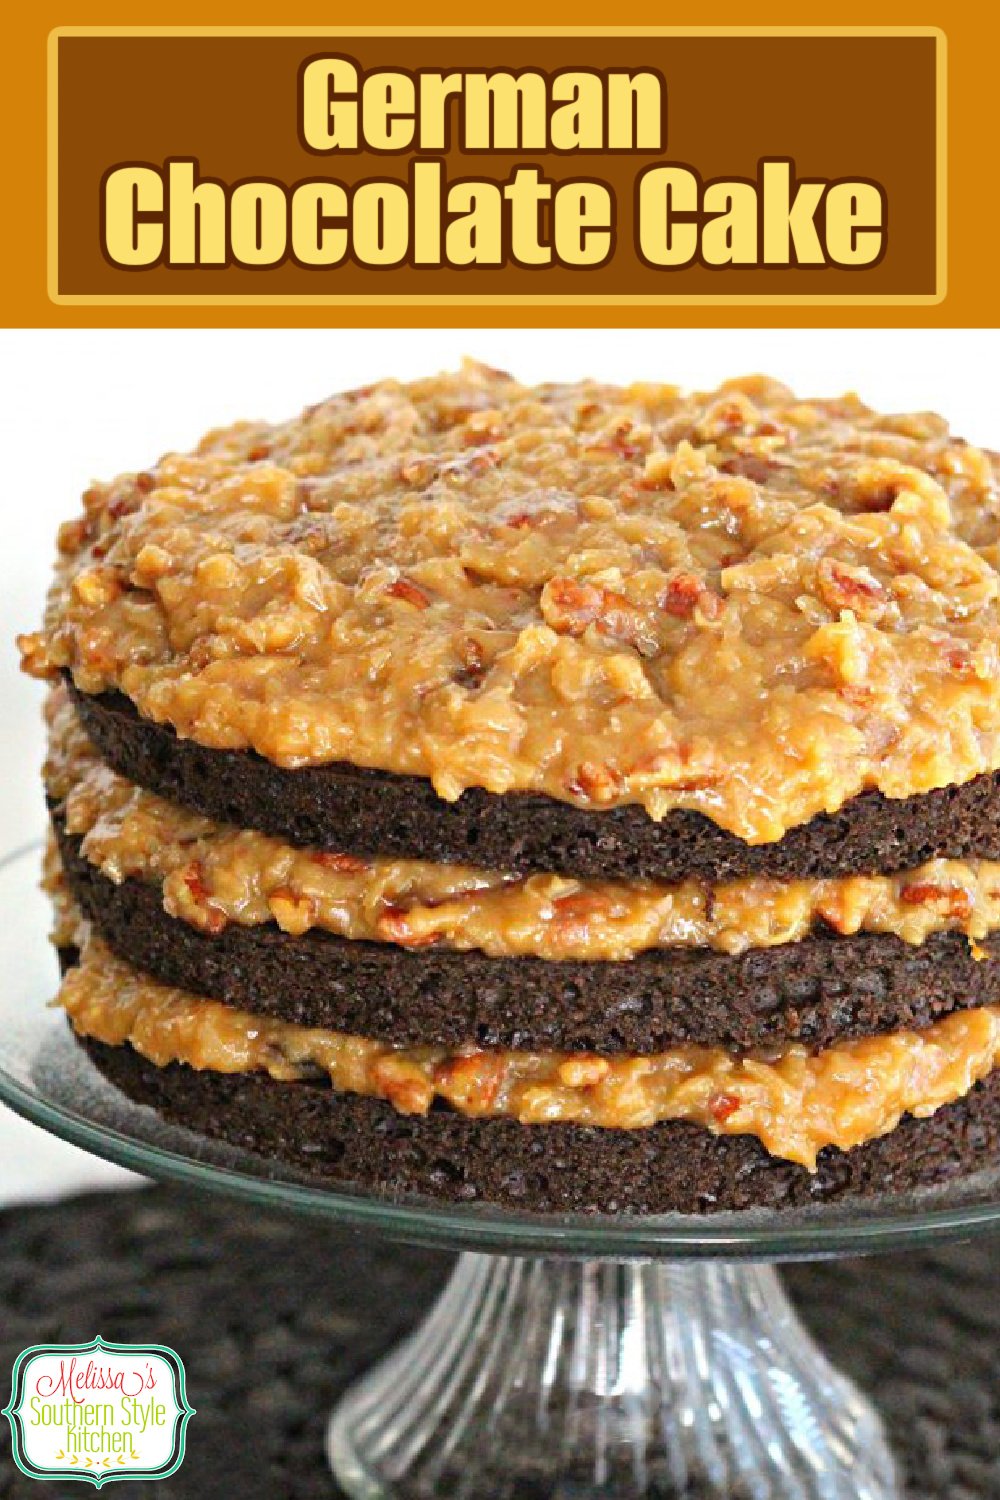 This recipe for German Chocolate Cake is a classic that everybody needs on their desserts menu #germanchocolatecake #chocolatecake #chocolate #cakerecipes #cakes #desserts #dessertfoodrecipes #southernrecipes #southernfood #holidayrecipes